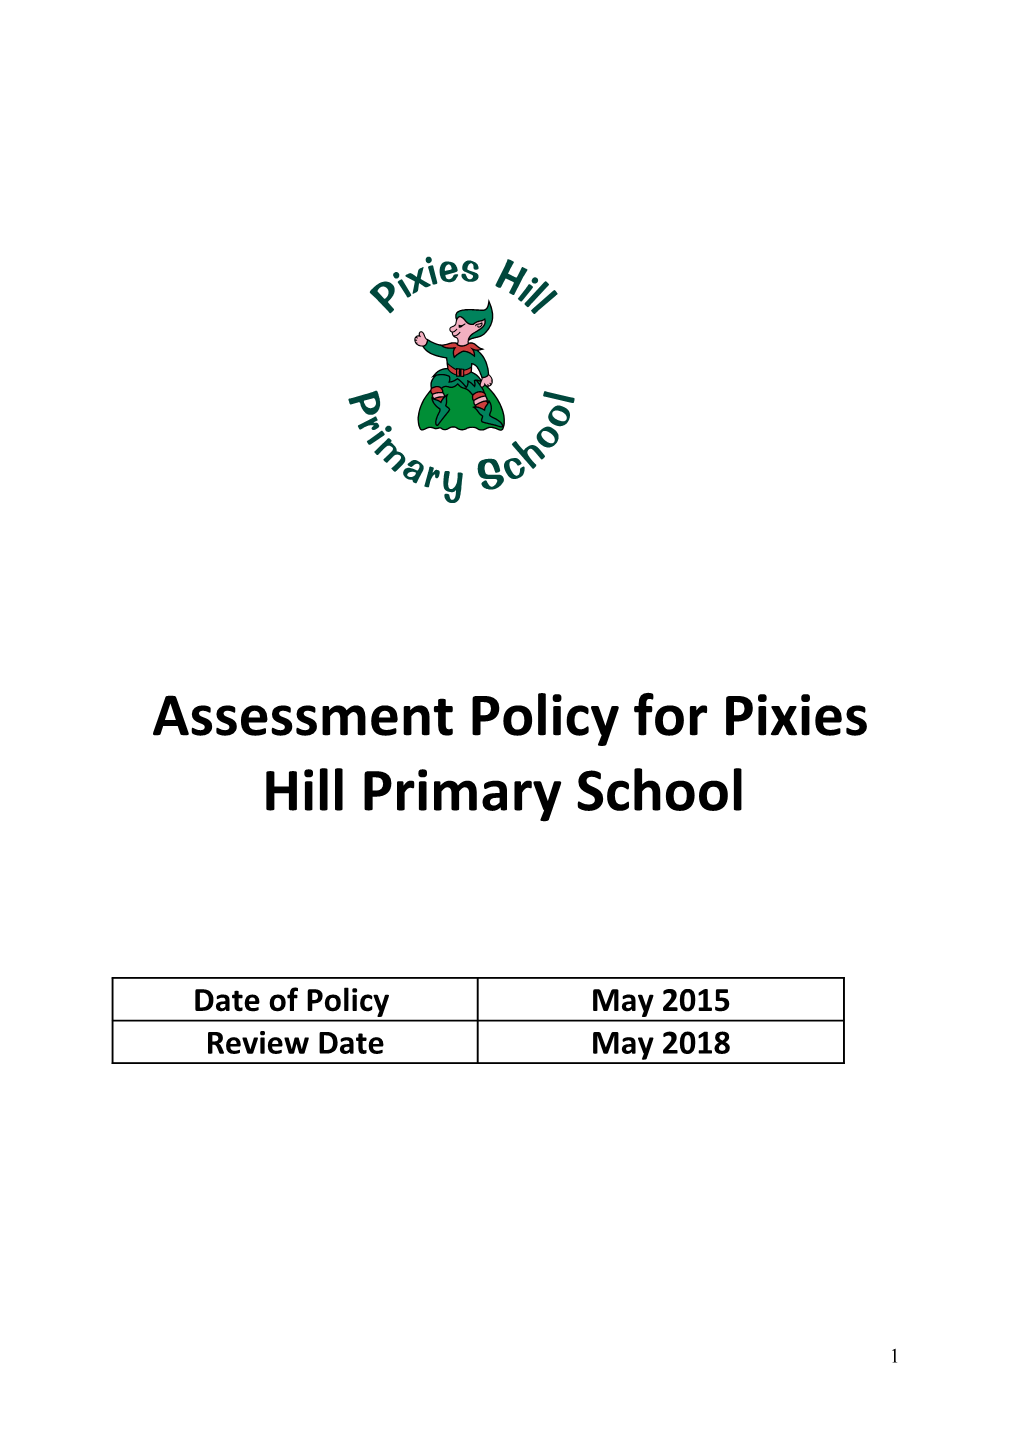 Policy for Assessment